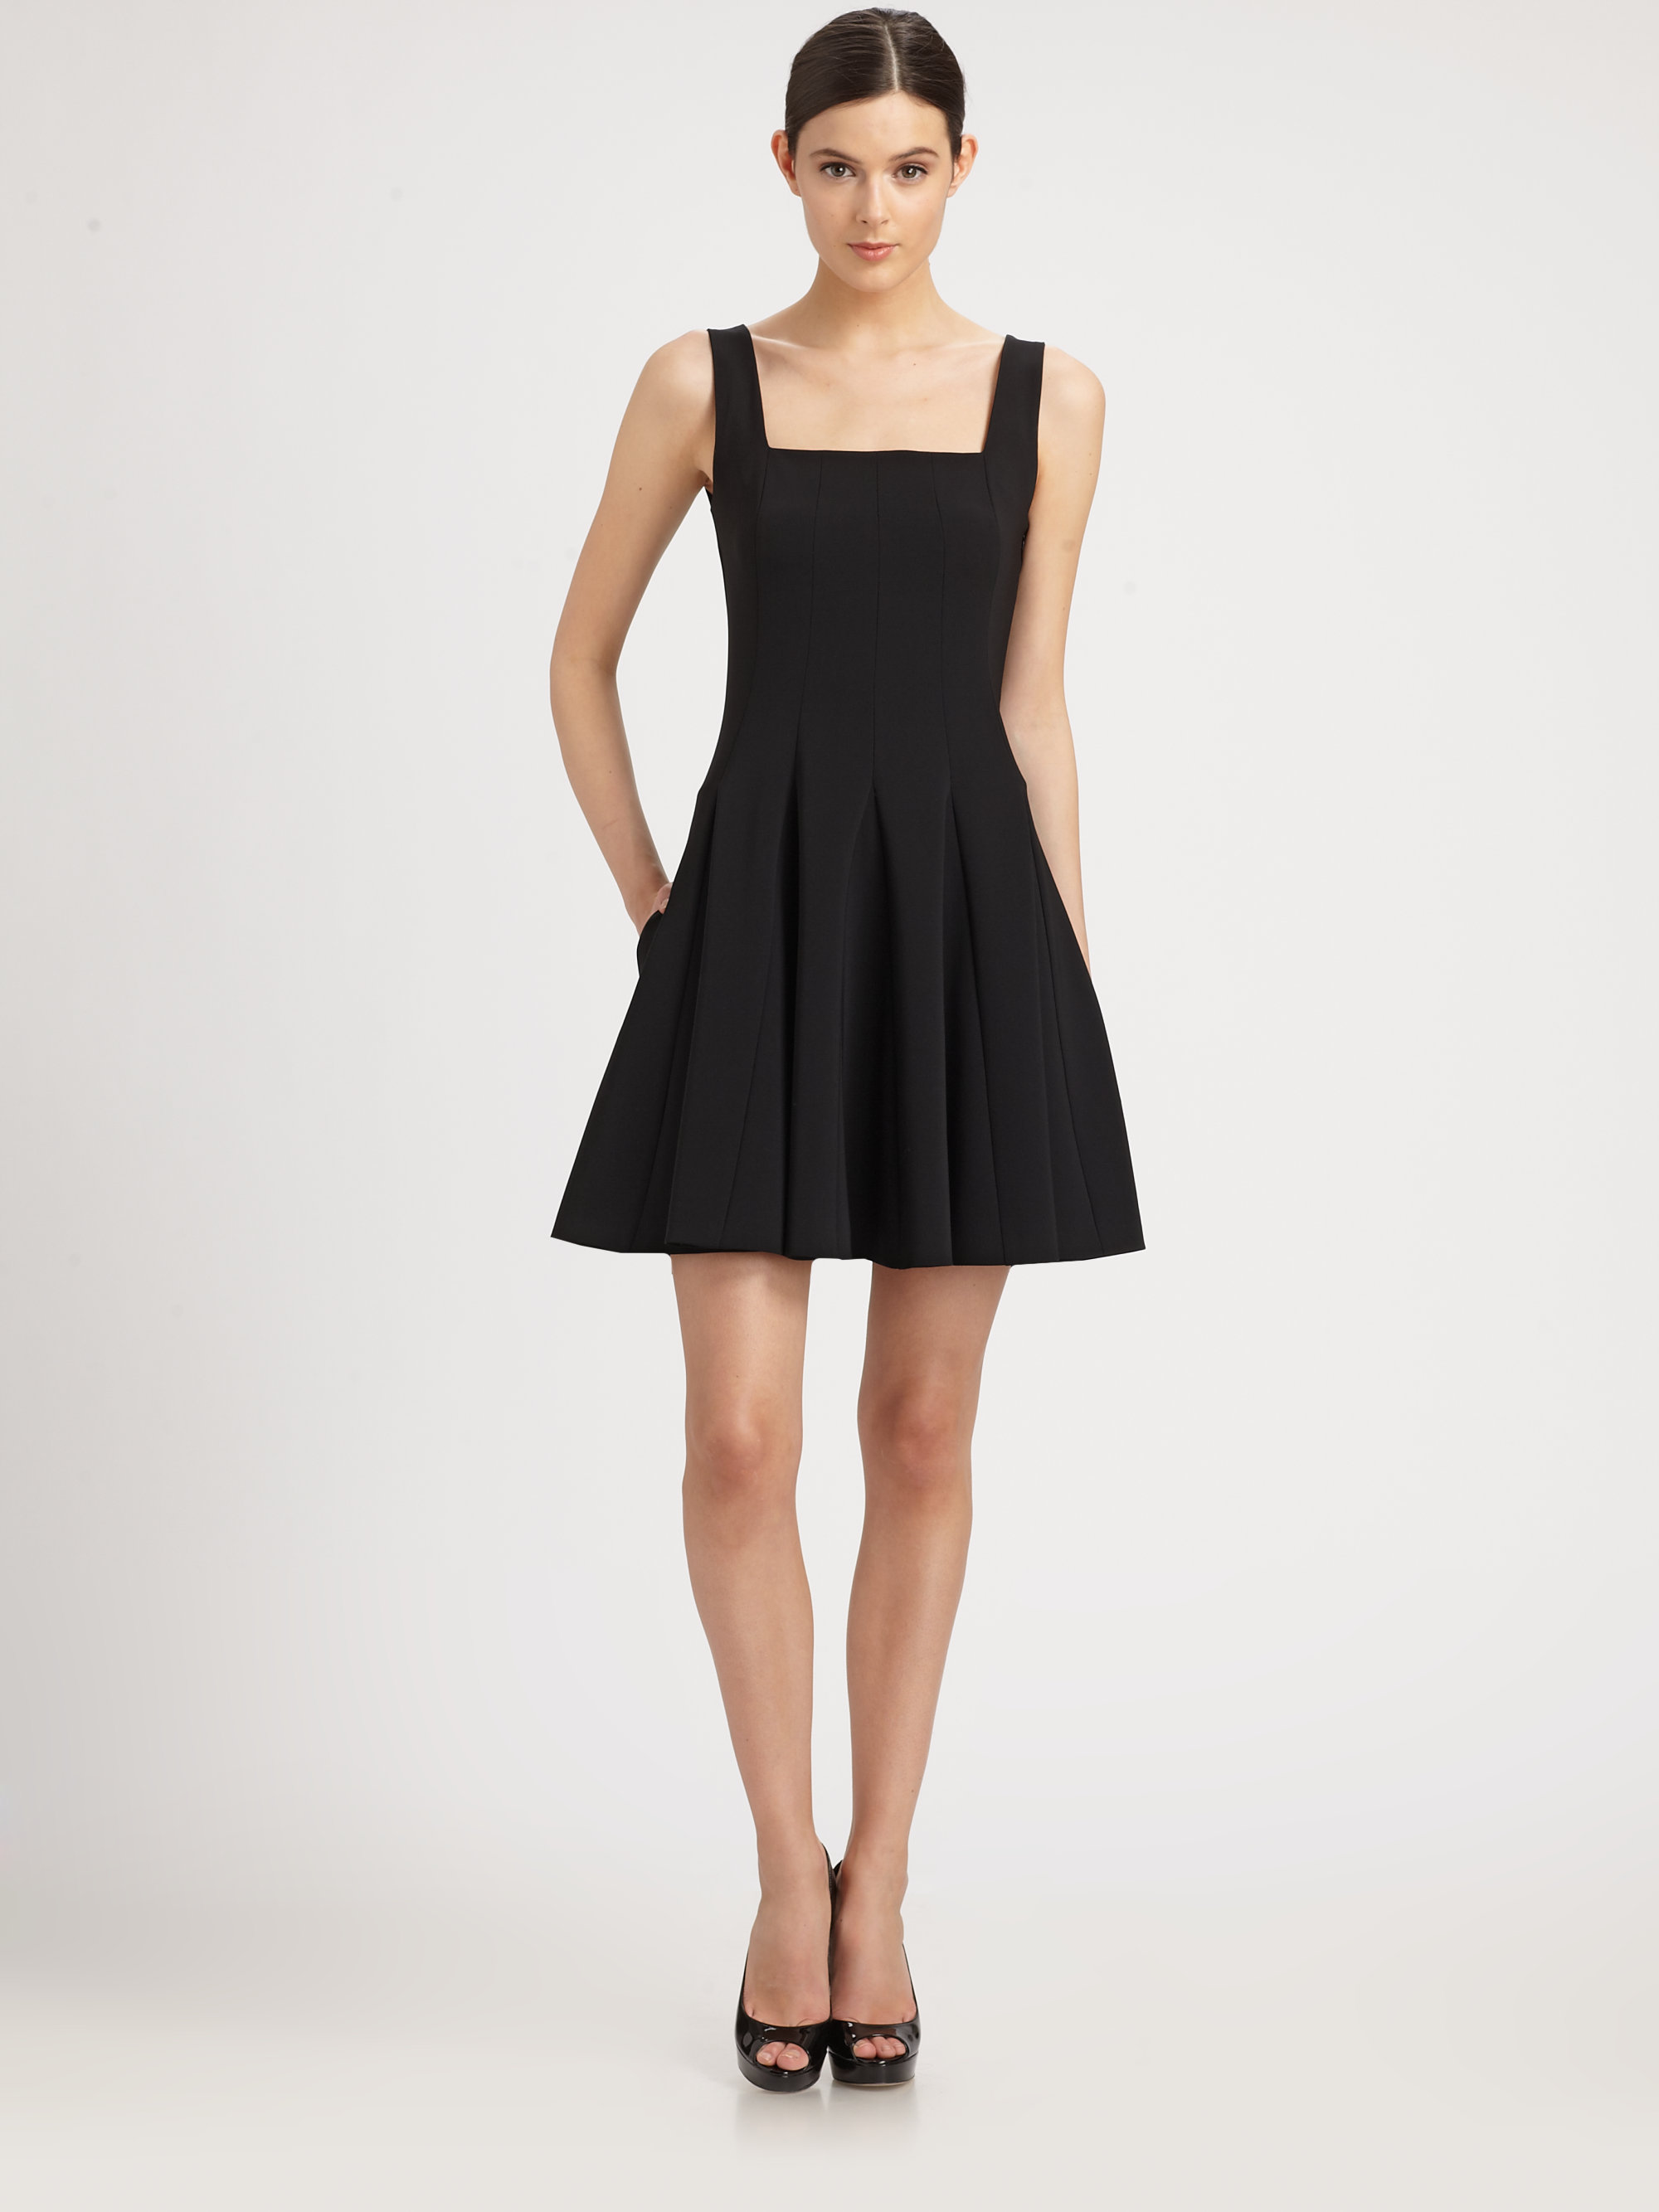 Moschino Squareneck Pleated Dress in Black | Lyst